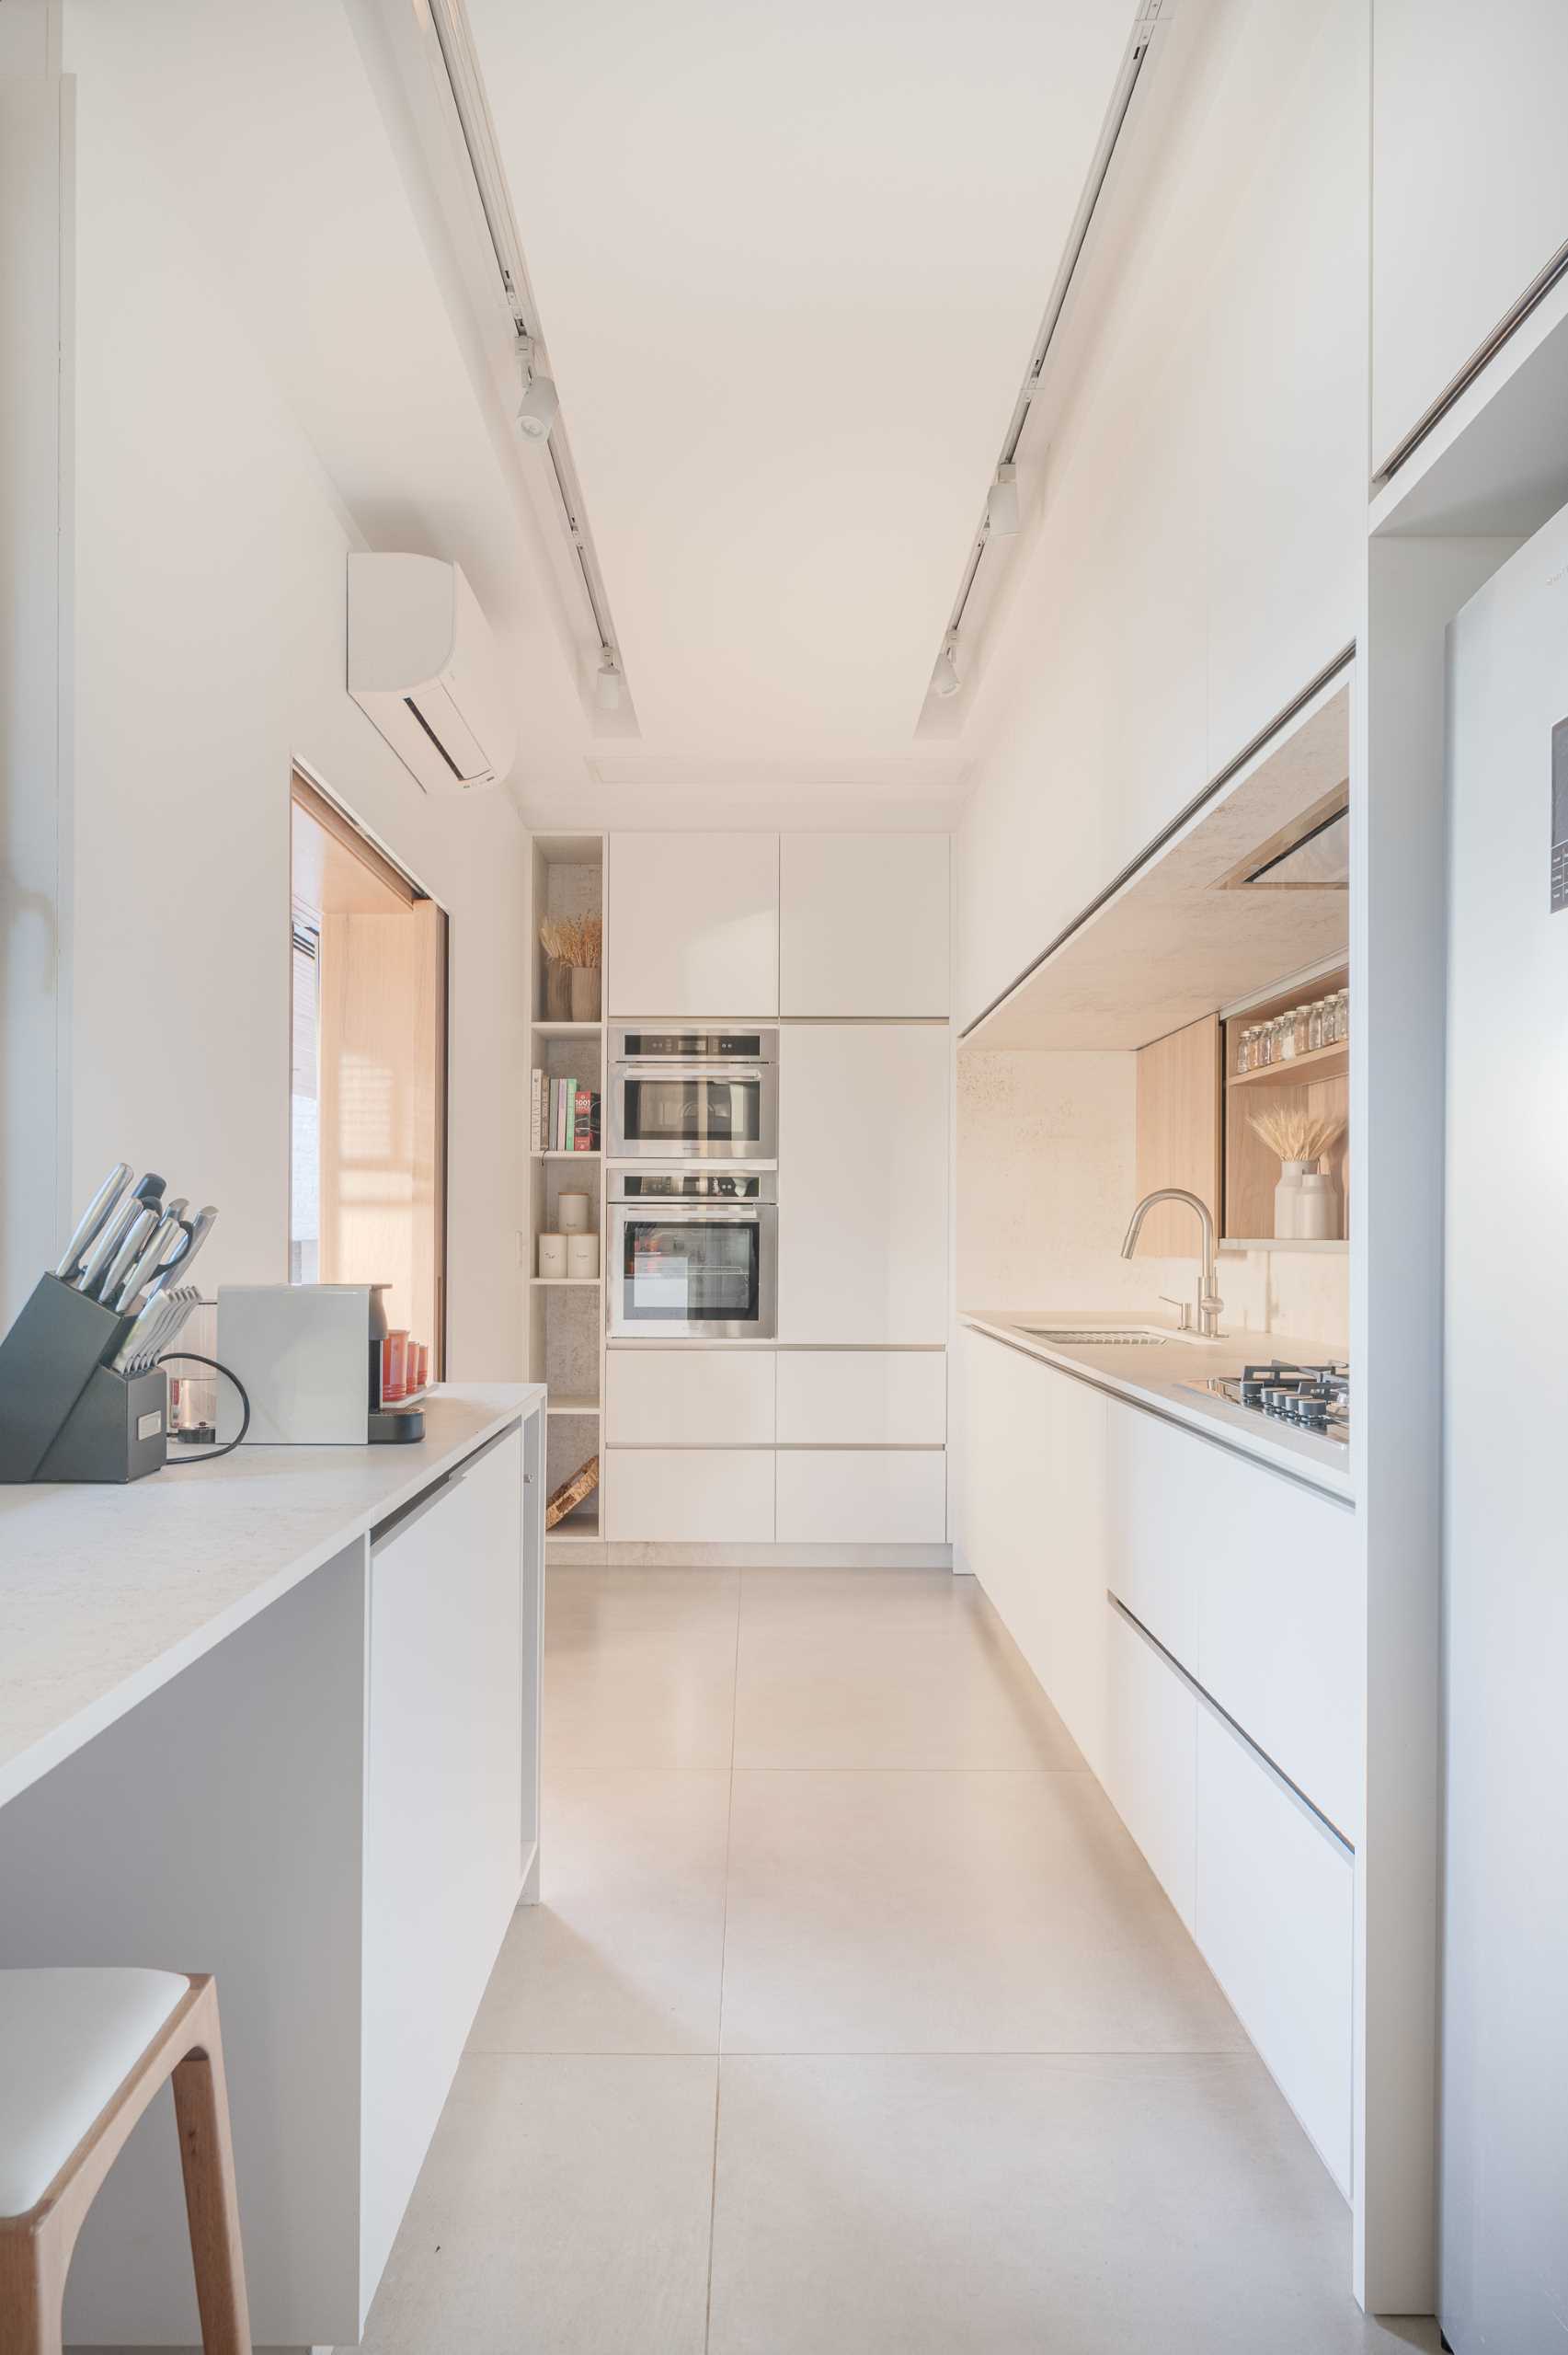 A modern prep kitchen with plenty of pantry space.